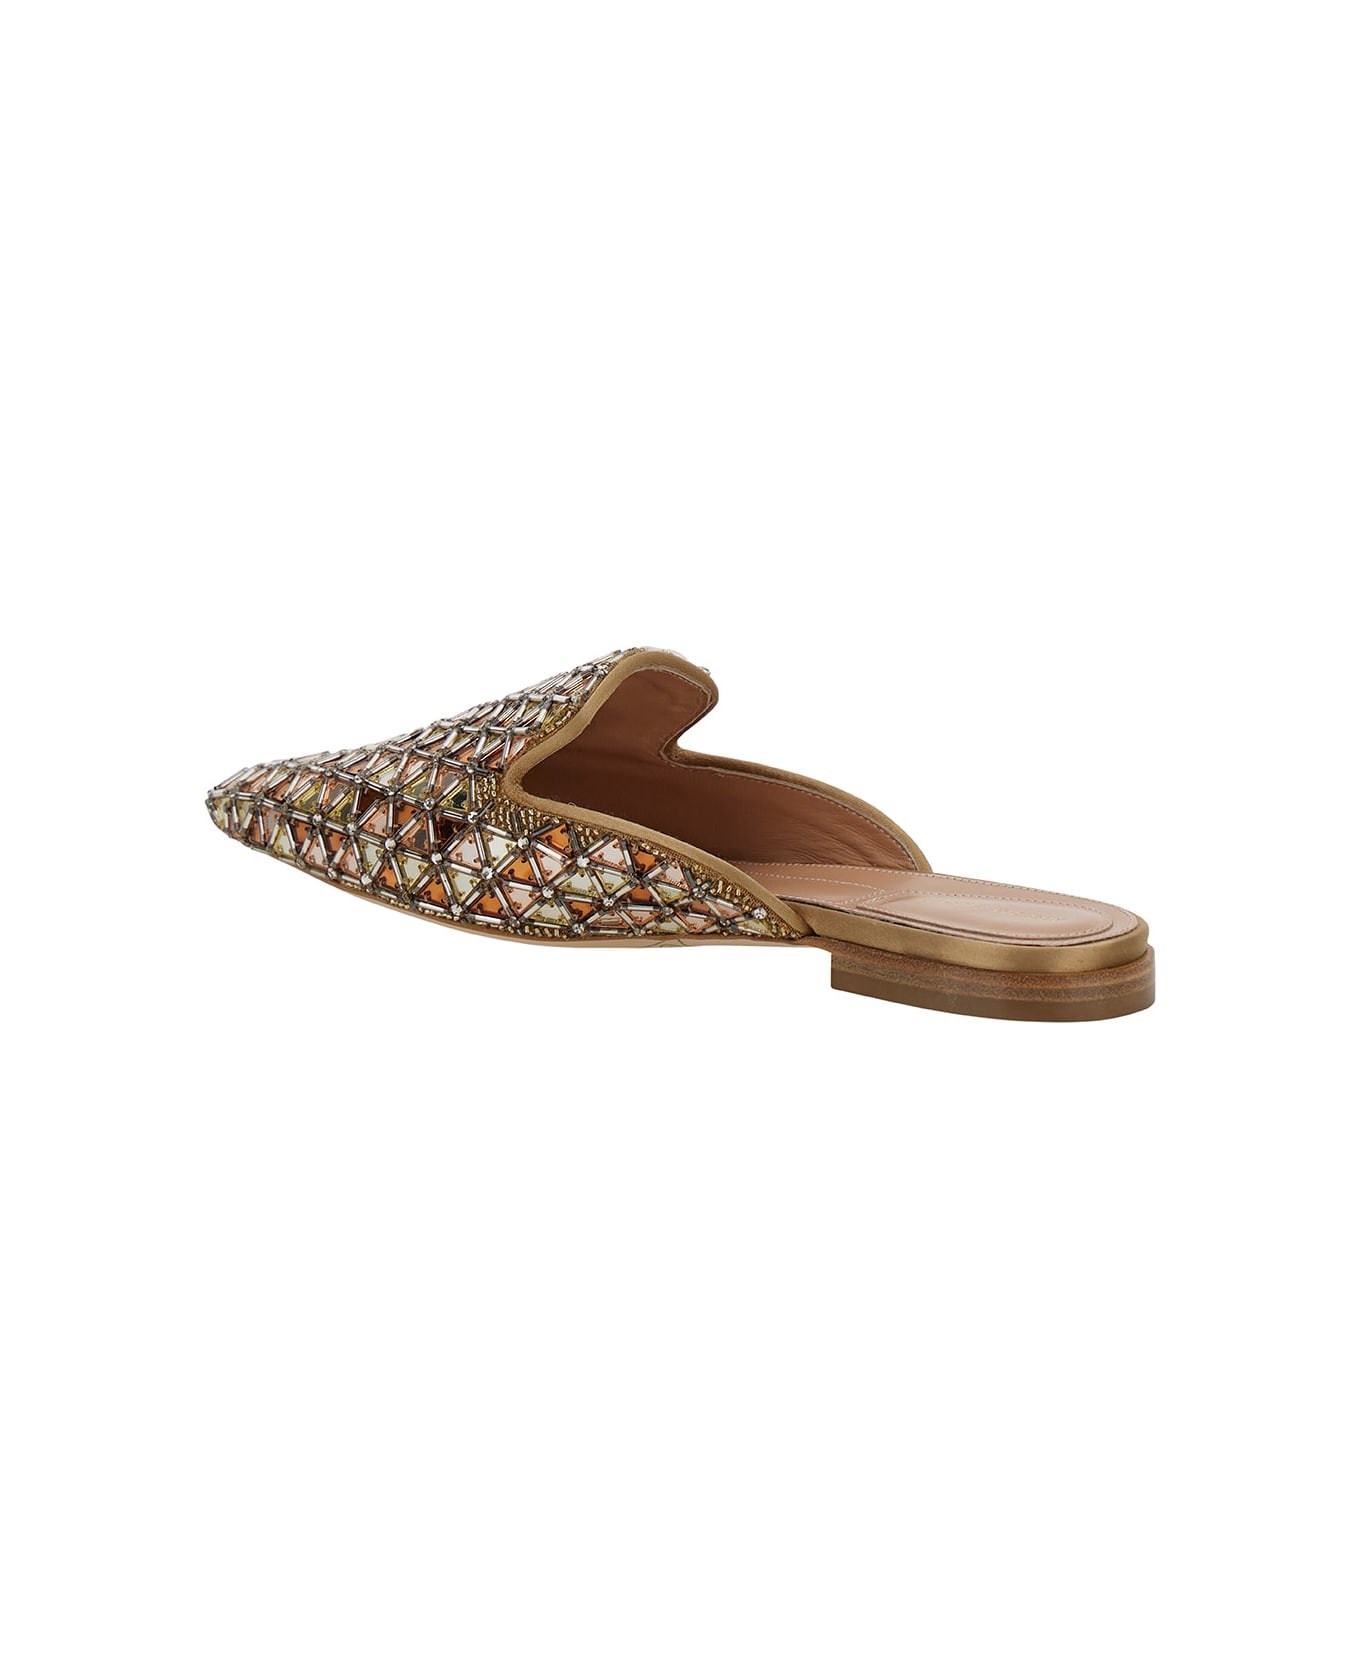 Alberta Ferretti Brown Mules With Embroideries In Leather And Acetate Woman - Beige サンダル